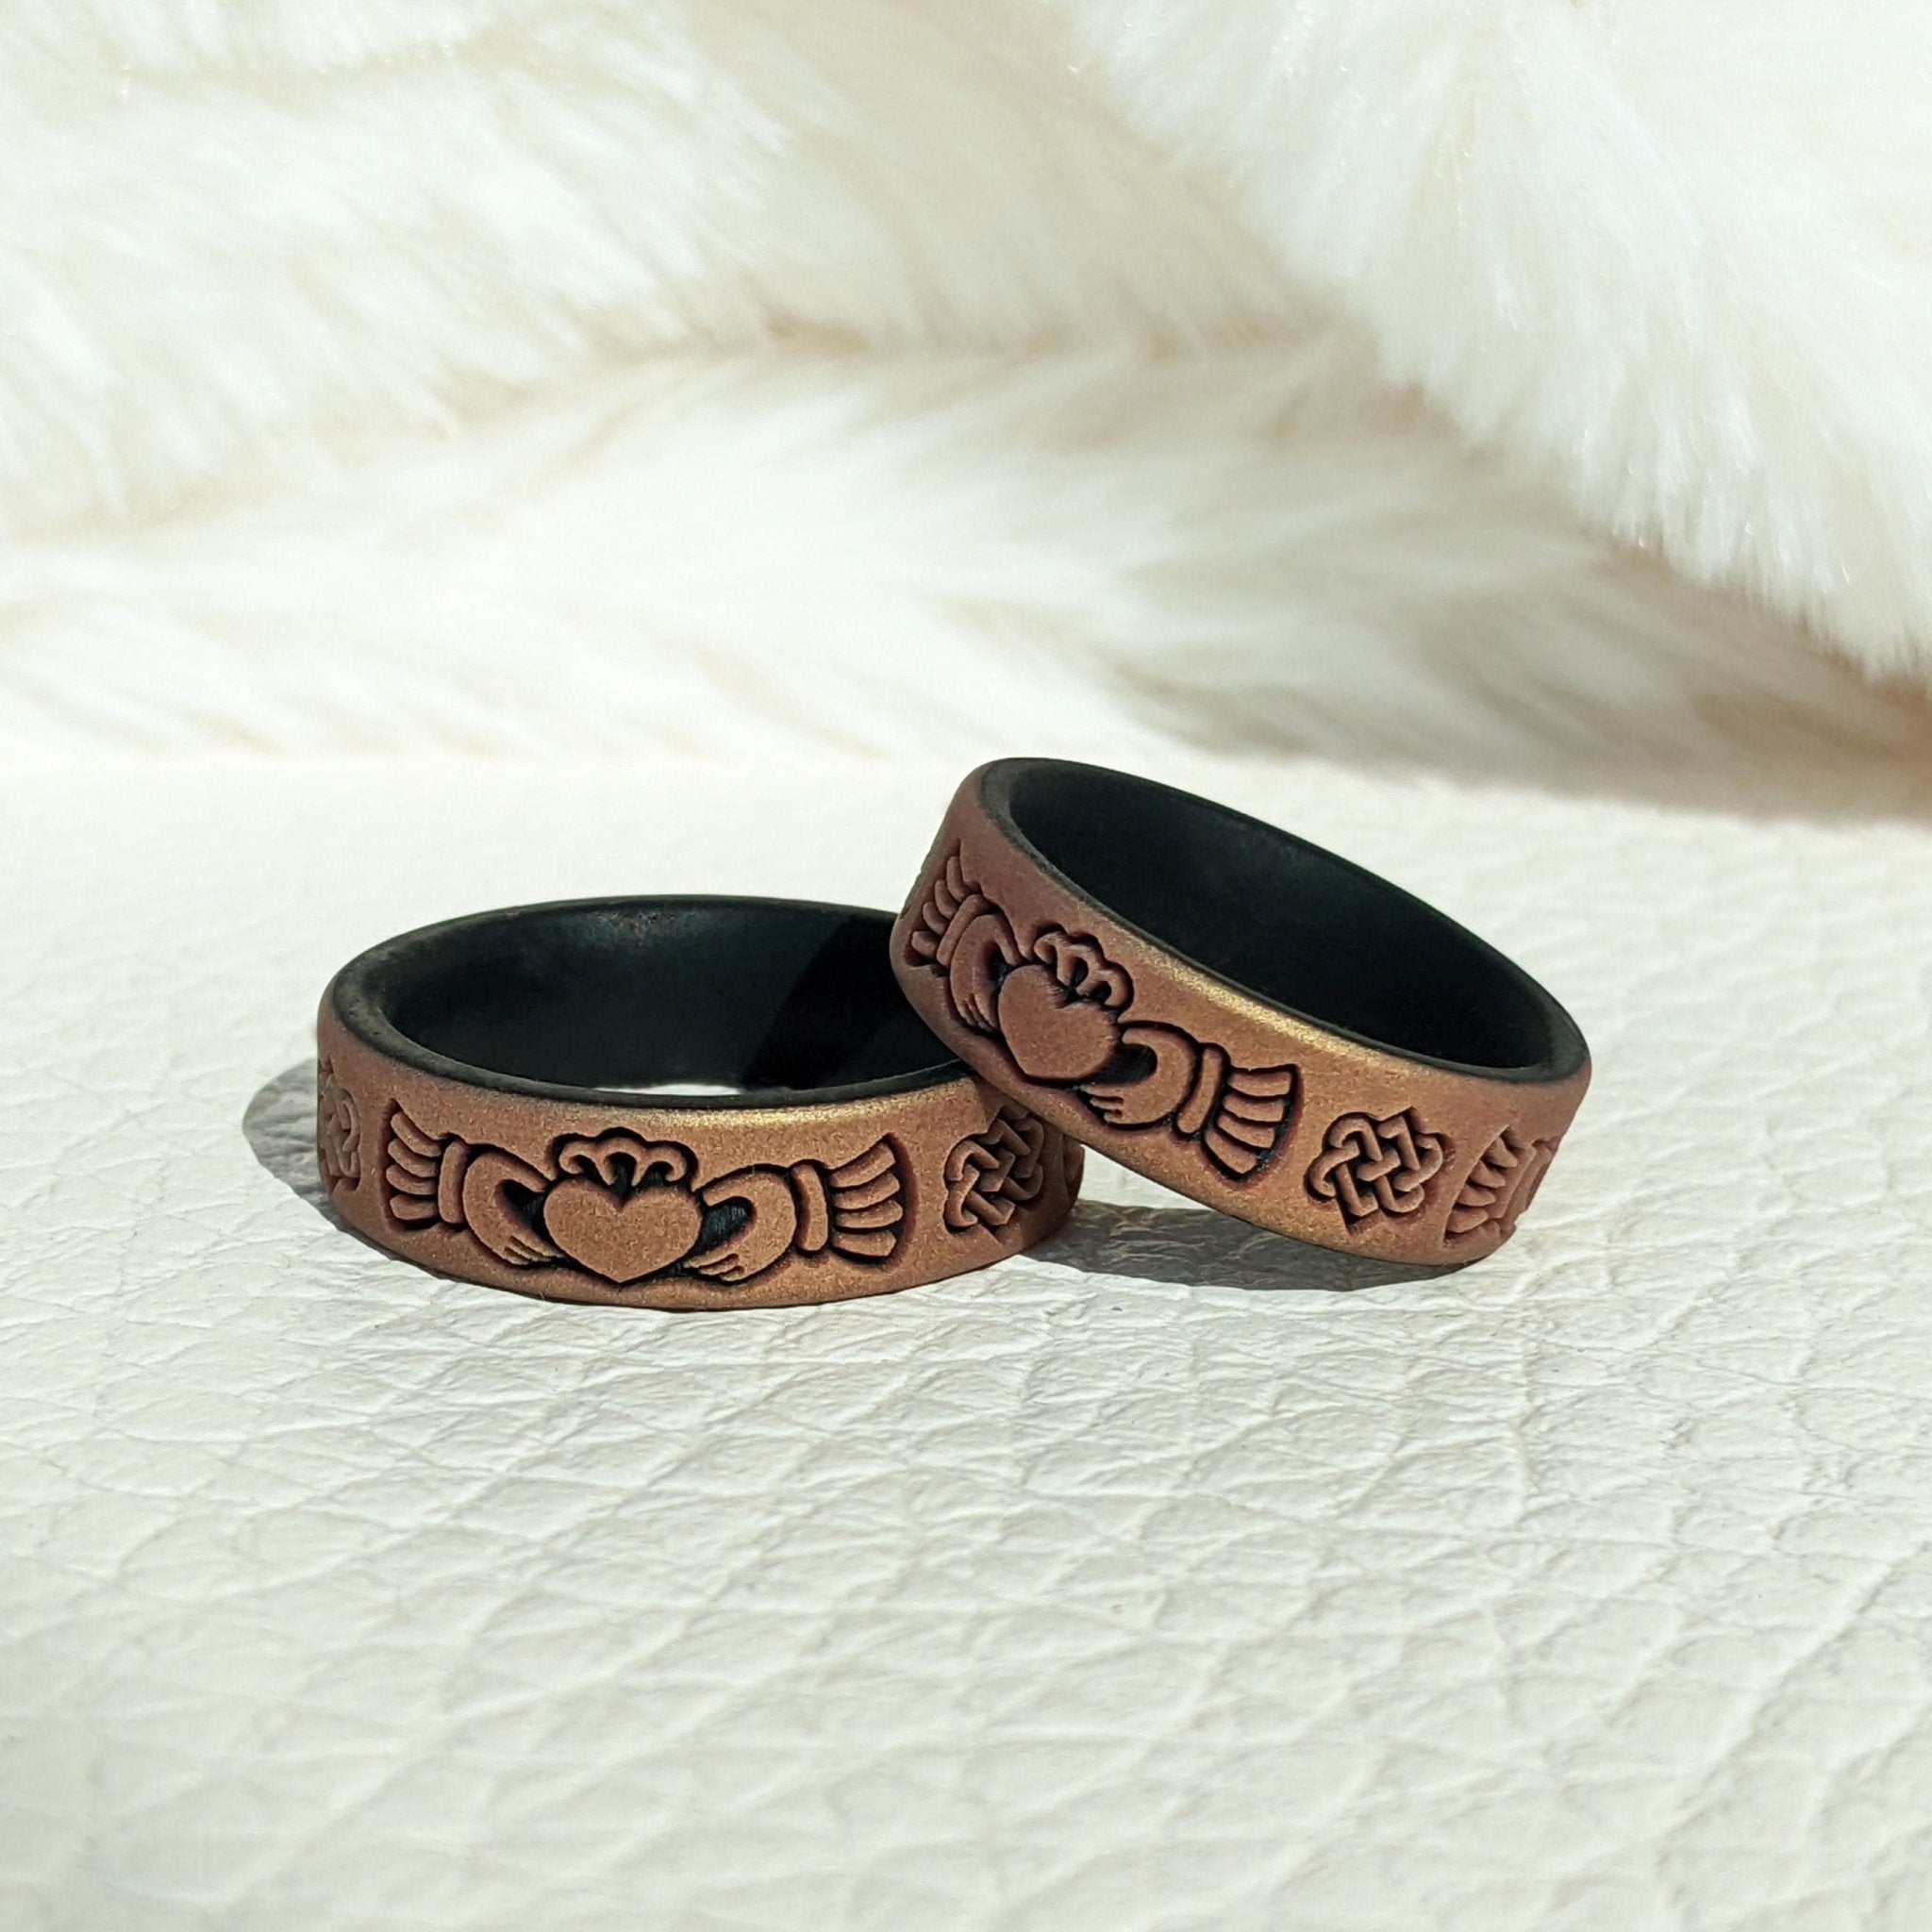 Claddagh Silicone Wedding Band - Engraved Dual Layer - Knot Theory